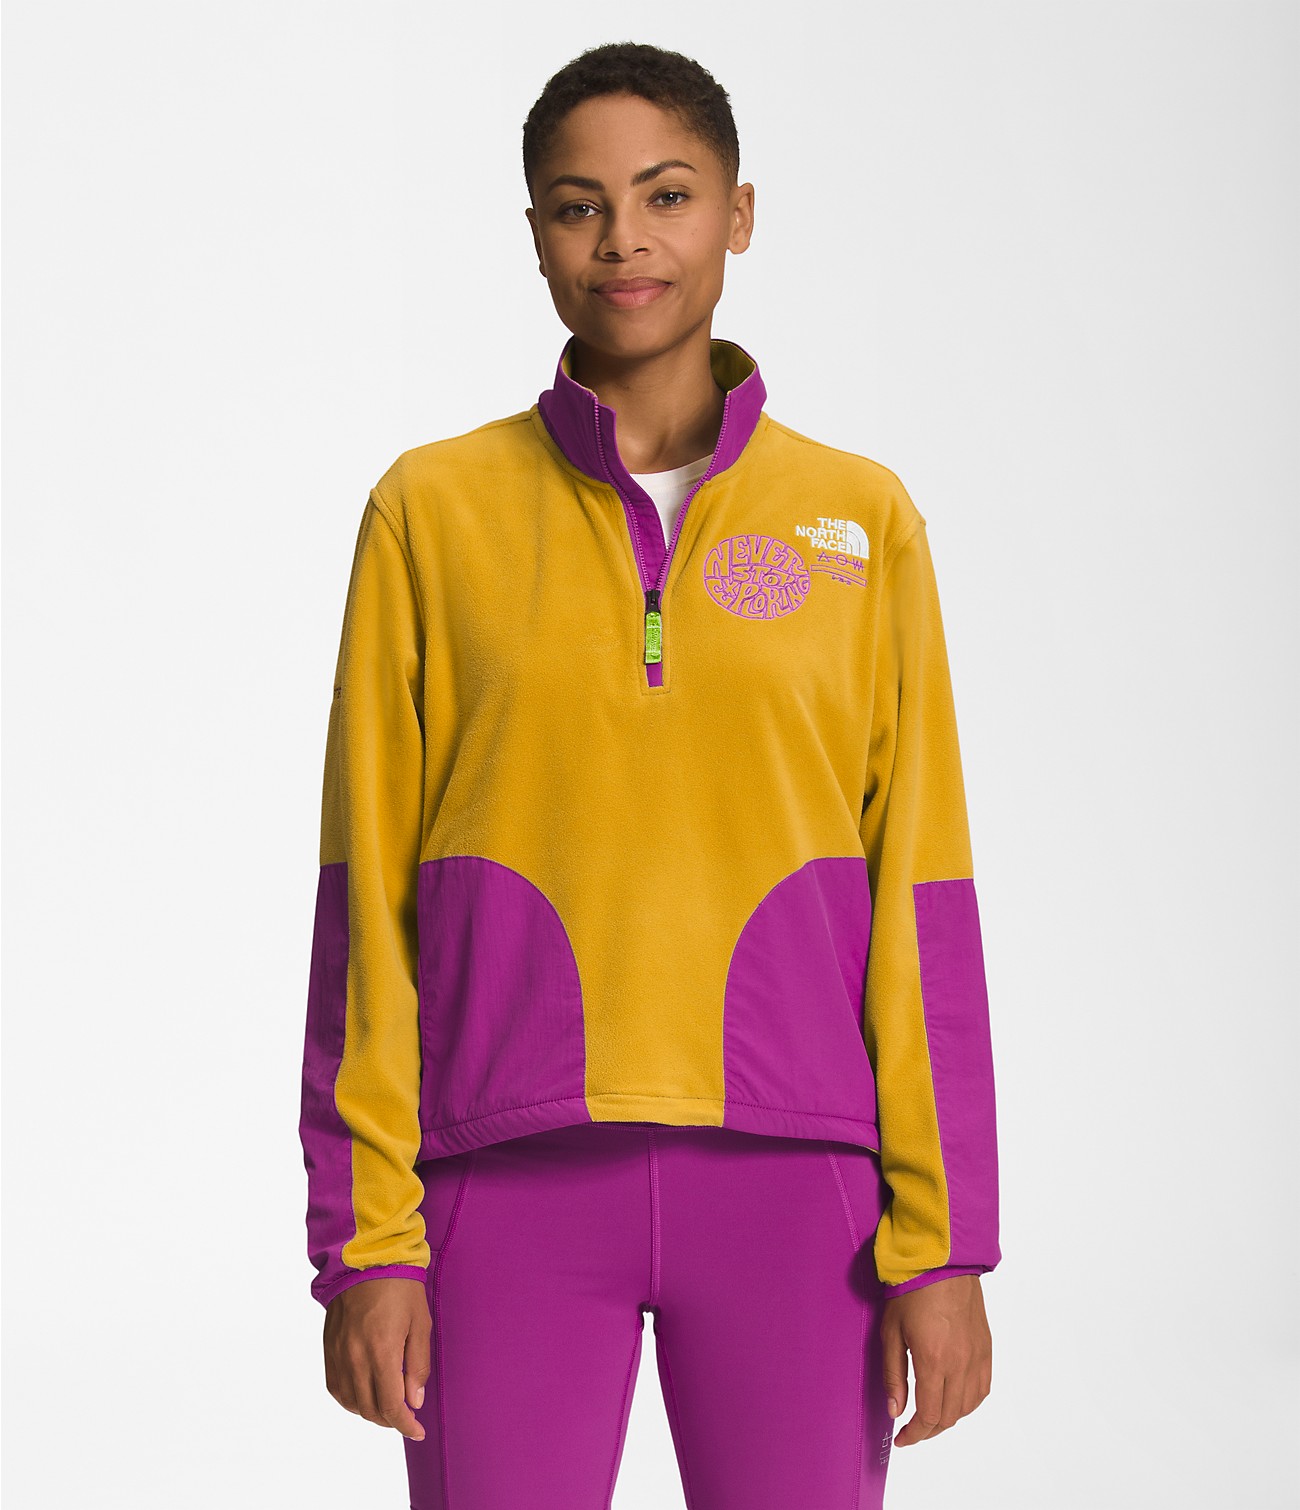 Women's Fleece Pullovers | The North Face